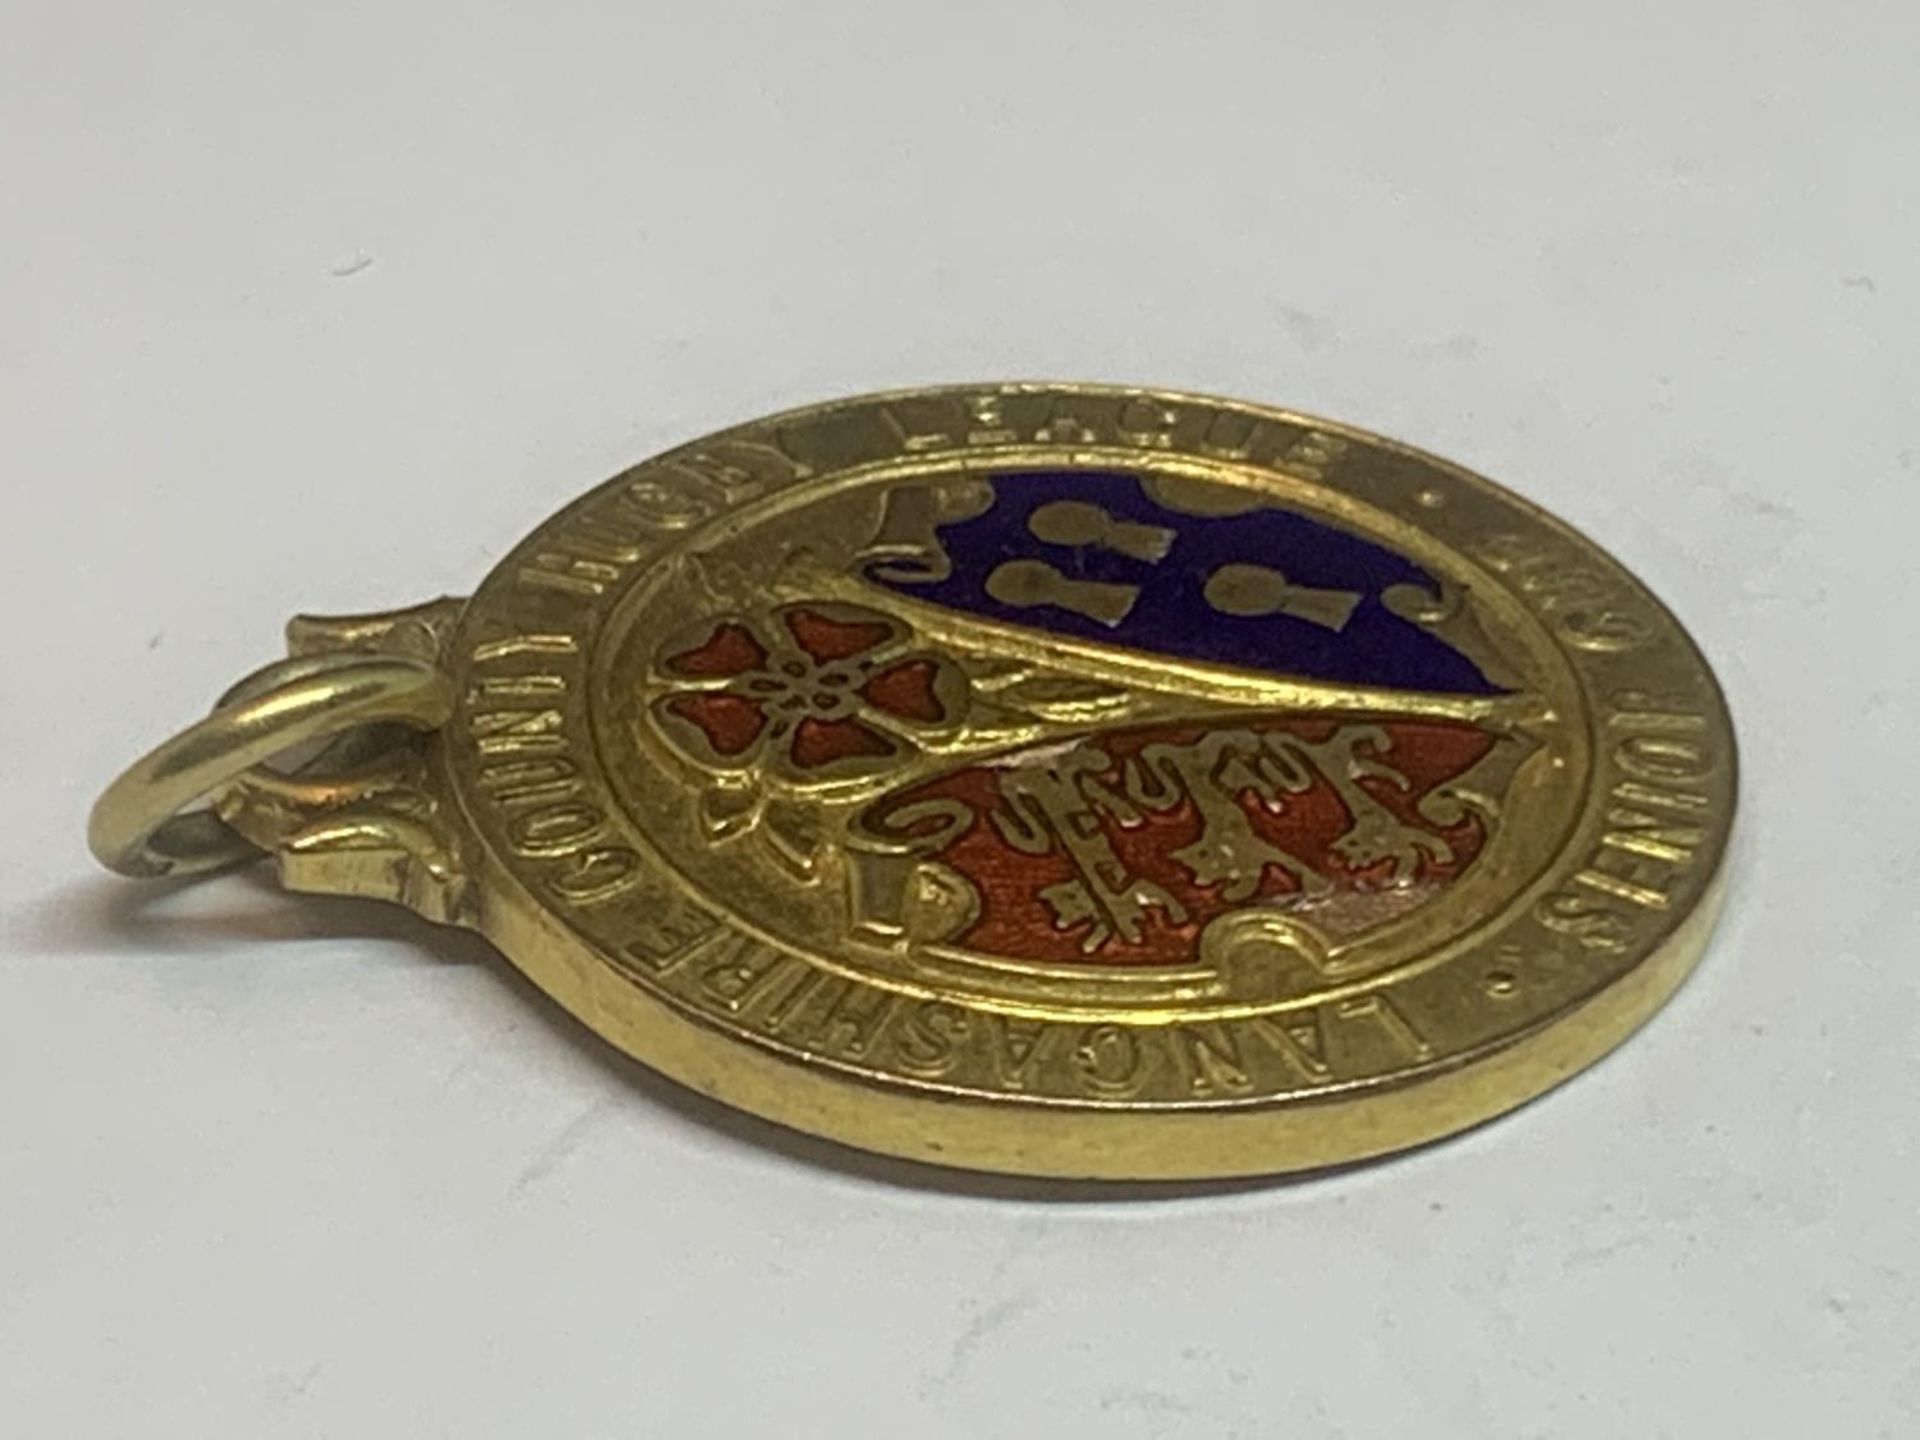 A HALLMARKED 9 CARAT GOLD LANCASHIRE COUNTY RUGBY LEAGUE SENIOR CUP MEDAL. ENGRAVED WINNERS 1936- - Image 5 of 5